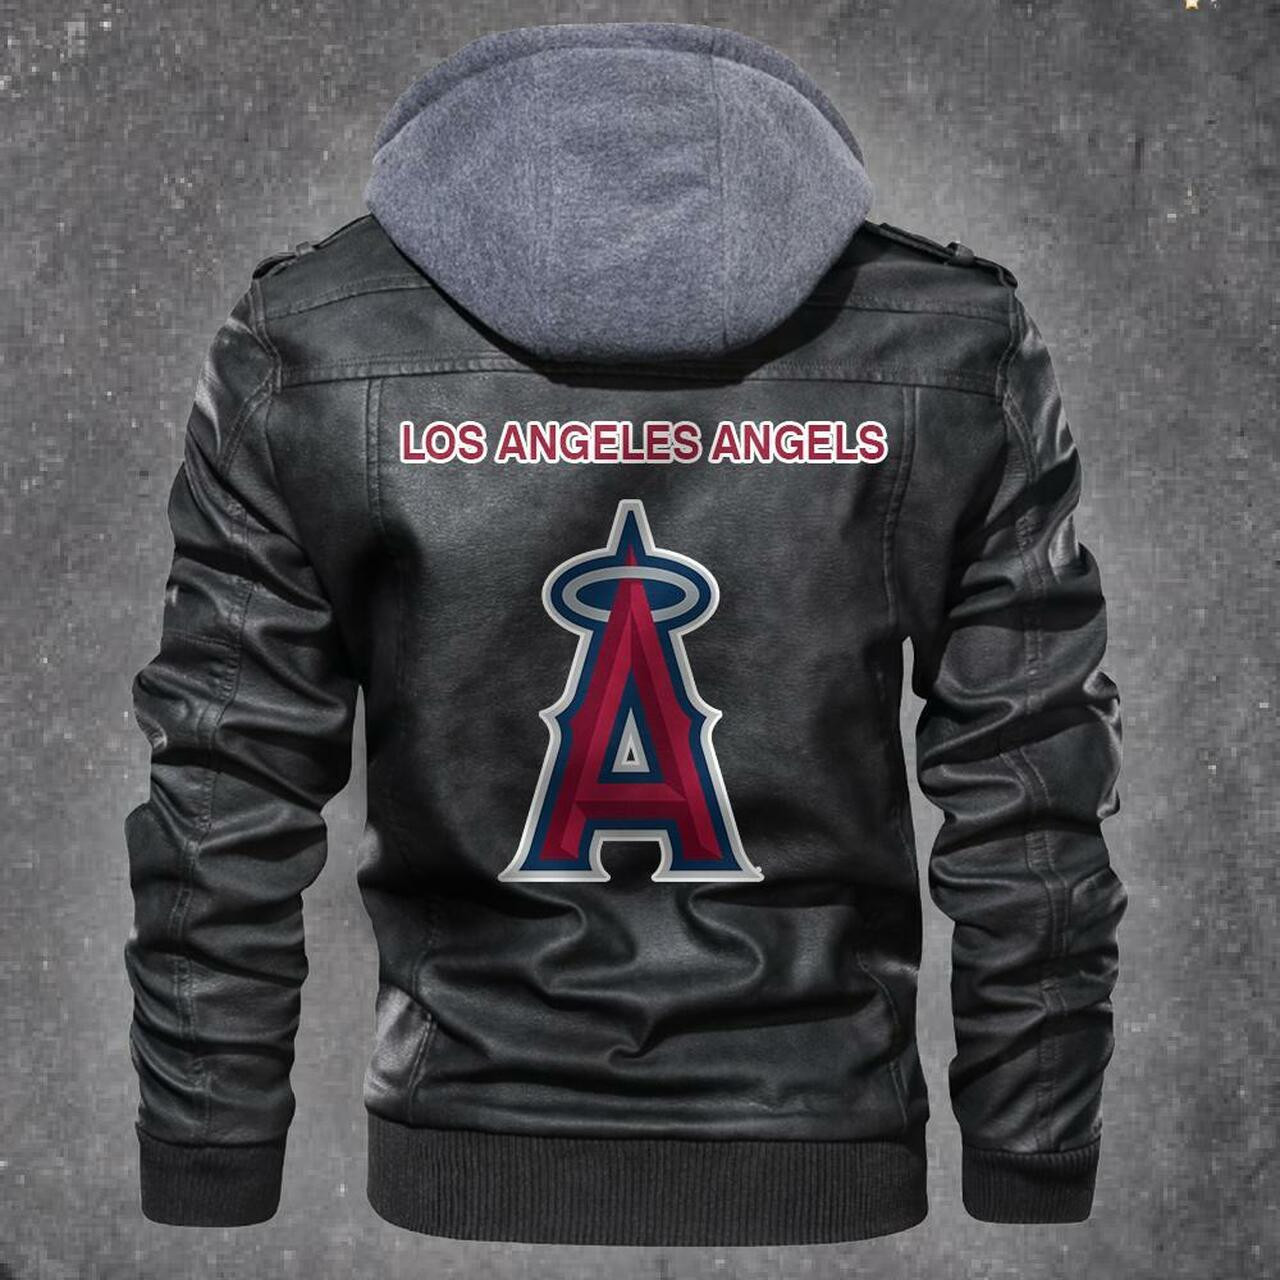 Check out and find the right leather jacket below 403